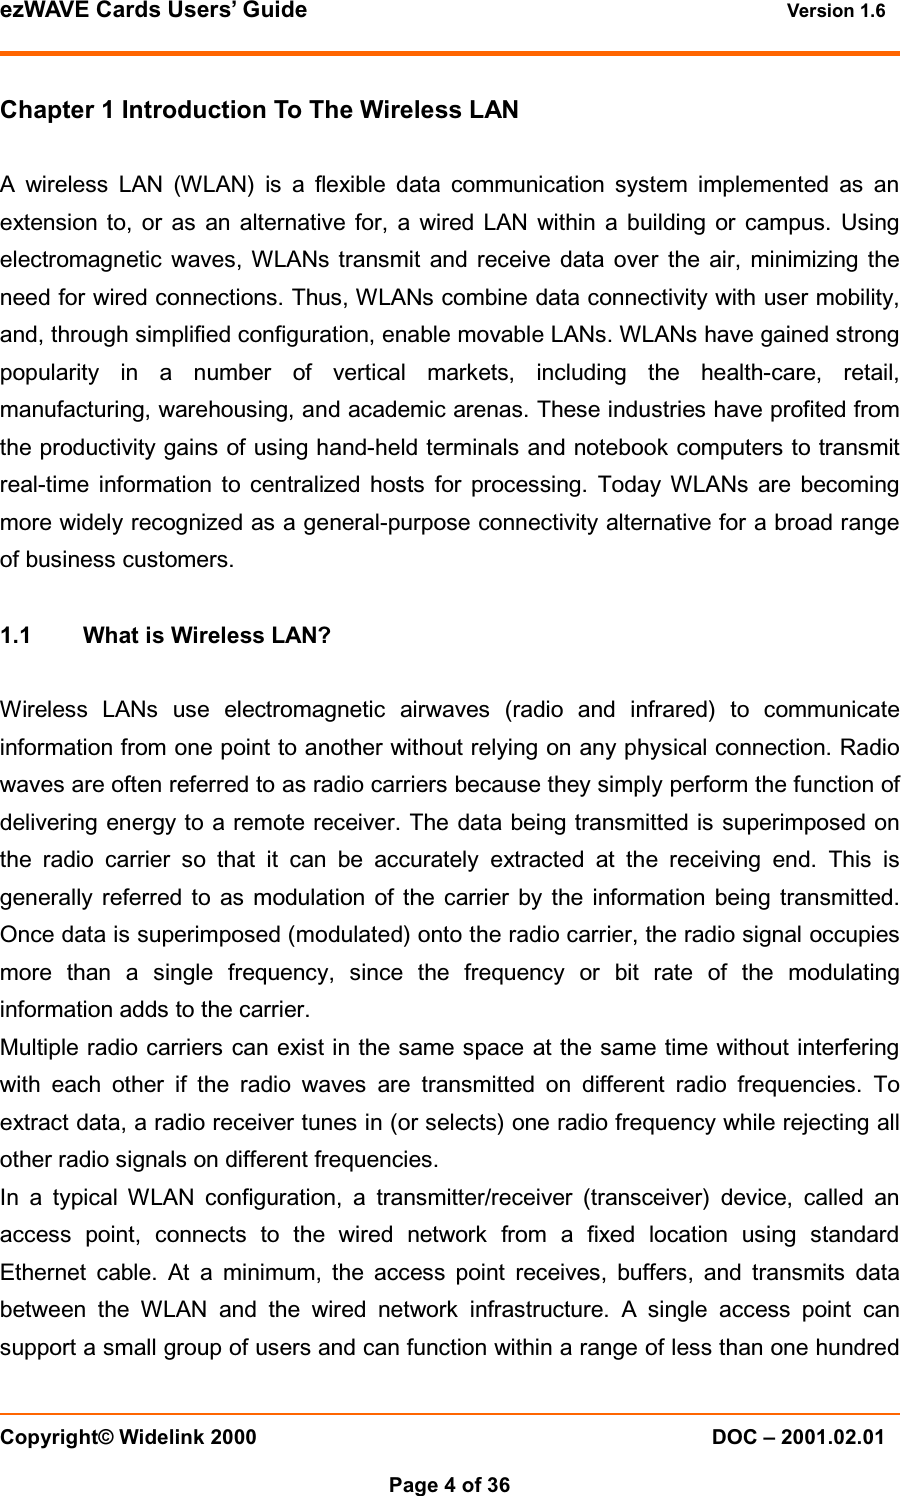 ezWAVE Cards Users’ Guide Version 1.6 Copyright© Widelink 2000 DOC – 2001.02.01Page 4 of 36 Chapter 1 Introduction To The Wireless LANA wireless LAN (WLAN) is a flexible data communication system implemented as anextension to, or as an alternative for, a wired LAN within a building or campus. Usingelectromagnetic waves, WLANs transmit and receive data over the air, minimizing theneed for wired connections. Thus, WLANs combine data connectivity with user mobility,and, through simplified configuration, enable movable LANs. WLANs have gained strongpopularity in a number of vertical markets, including the health-care, retail,manufacturing, warehousing, and academic arenas. These industries have profited fromthe productivity gains of using hand-held terminals and notebook computers to transmitreal-time information to centralized hosts for processing. Today WLANs are becomingmore widely recognized as a general-purpose connectivity alternative for a broad rangeof business customers.1.1 What is Wireless LAN?Wireless LANs use electromagnetic airwaves (radio and infrared) to communicateinformation from one point to another without relying on any physical connection. Radiowaves are often referred to as radio carriers because they simply perform the function ofdelivering energy to a remote receiver. The data being transmitted is superimposed onthe radio carrier so that it can be accurately extracted at the receiving end. This isgenerally referred to as modulation of the carrier by the information being transmitted.Once data is superimposed (modulated) onto the radio carrier, the radio signal occupiesmore than a single frequency, since the frequency or bit rate of the modulatinginformation adds to the carrier.Multiple radio carriers can exist in the same space at the same time without interferingwith each other if the radio waves are transmitted on different radio frequencies. Toextract data, a radio receiver tunes in (or selects) one radio frequency while rejecting allother radio signals on different frequencies.In a typical WLAN configuration, a transmitter/receiver (transceiver) device, called anaccess point, connects to the wired network from a fixed location using standardEthernet cable. At a minimum, the access point receives, buffers, and transmits databetween the WLAN and the wired network infrastructure. A single access point cansupport a small group of users and can function within a range of less than one hundred